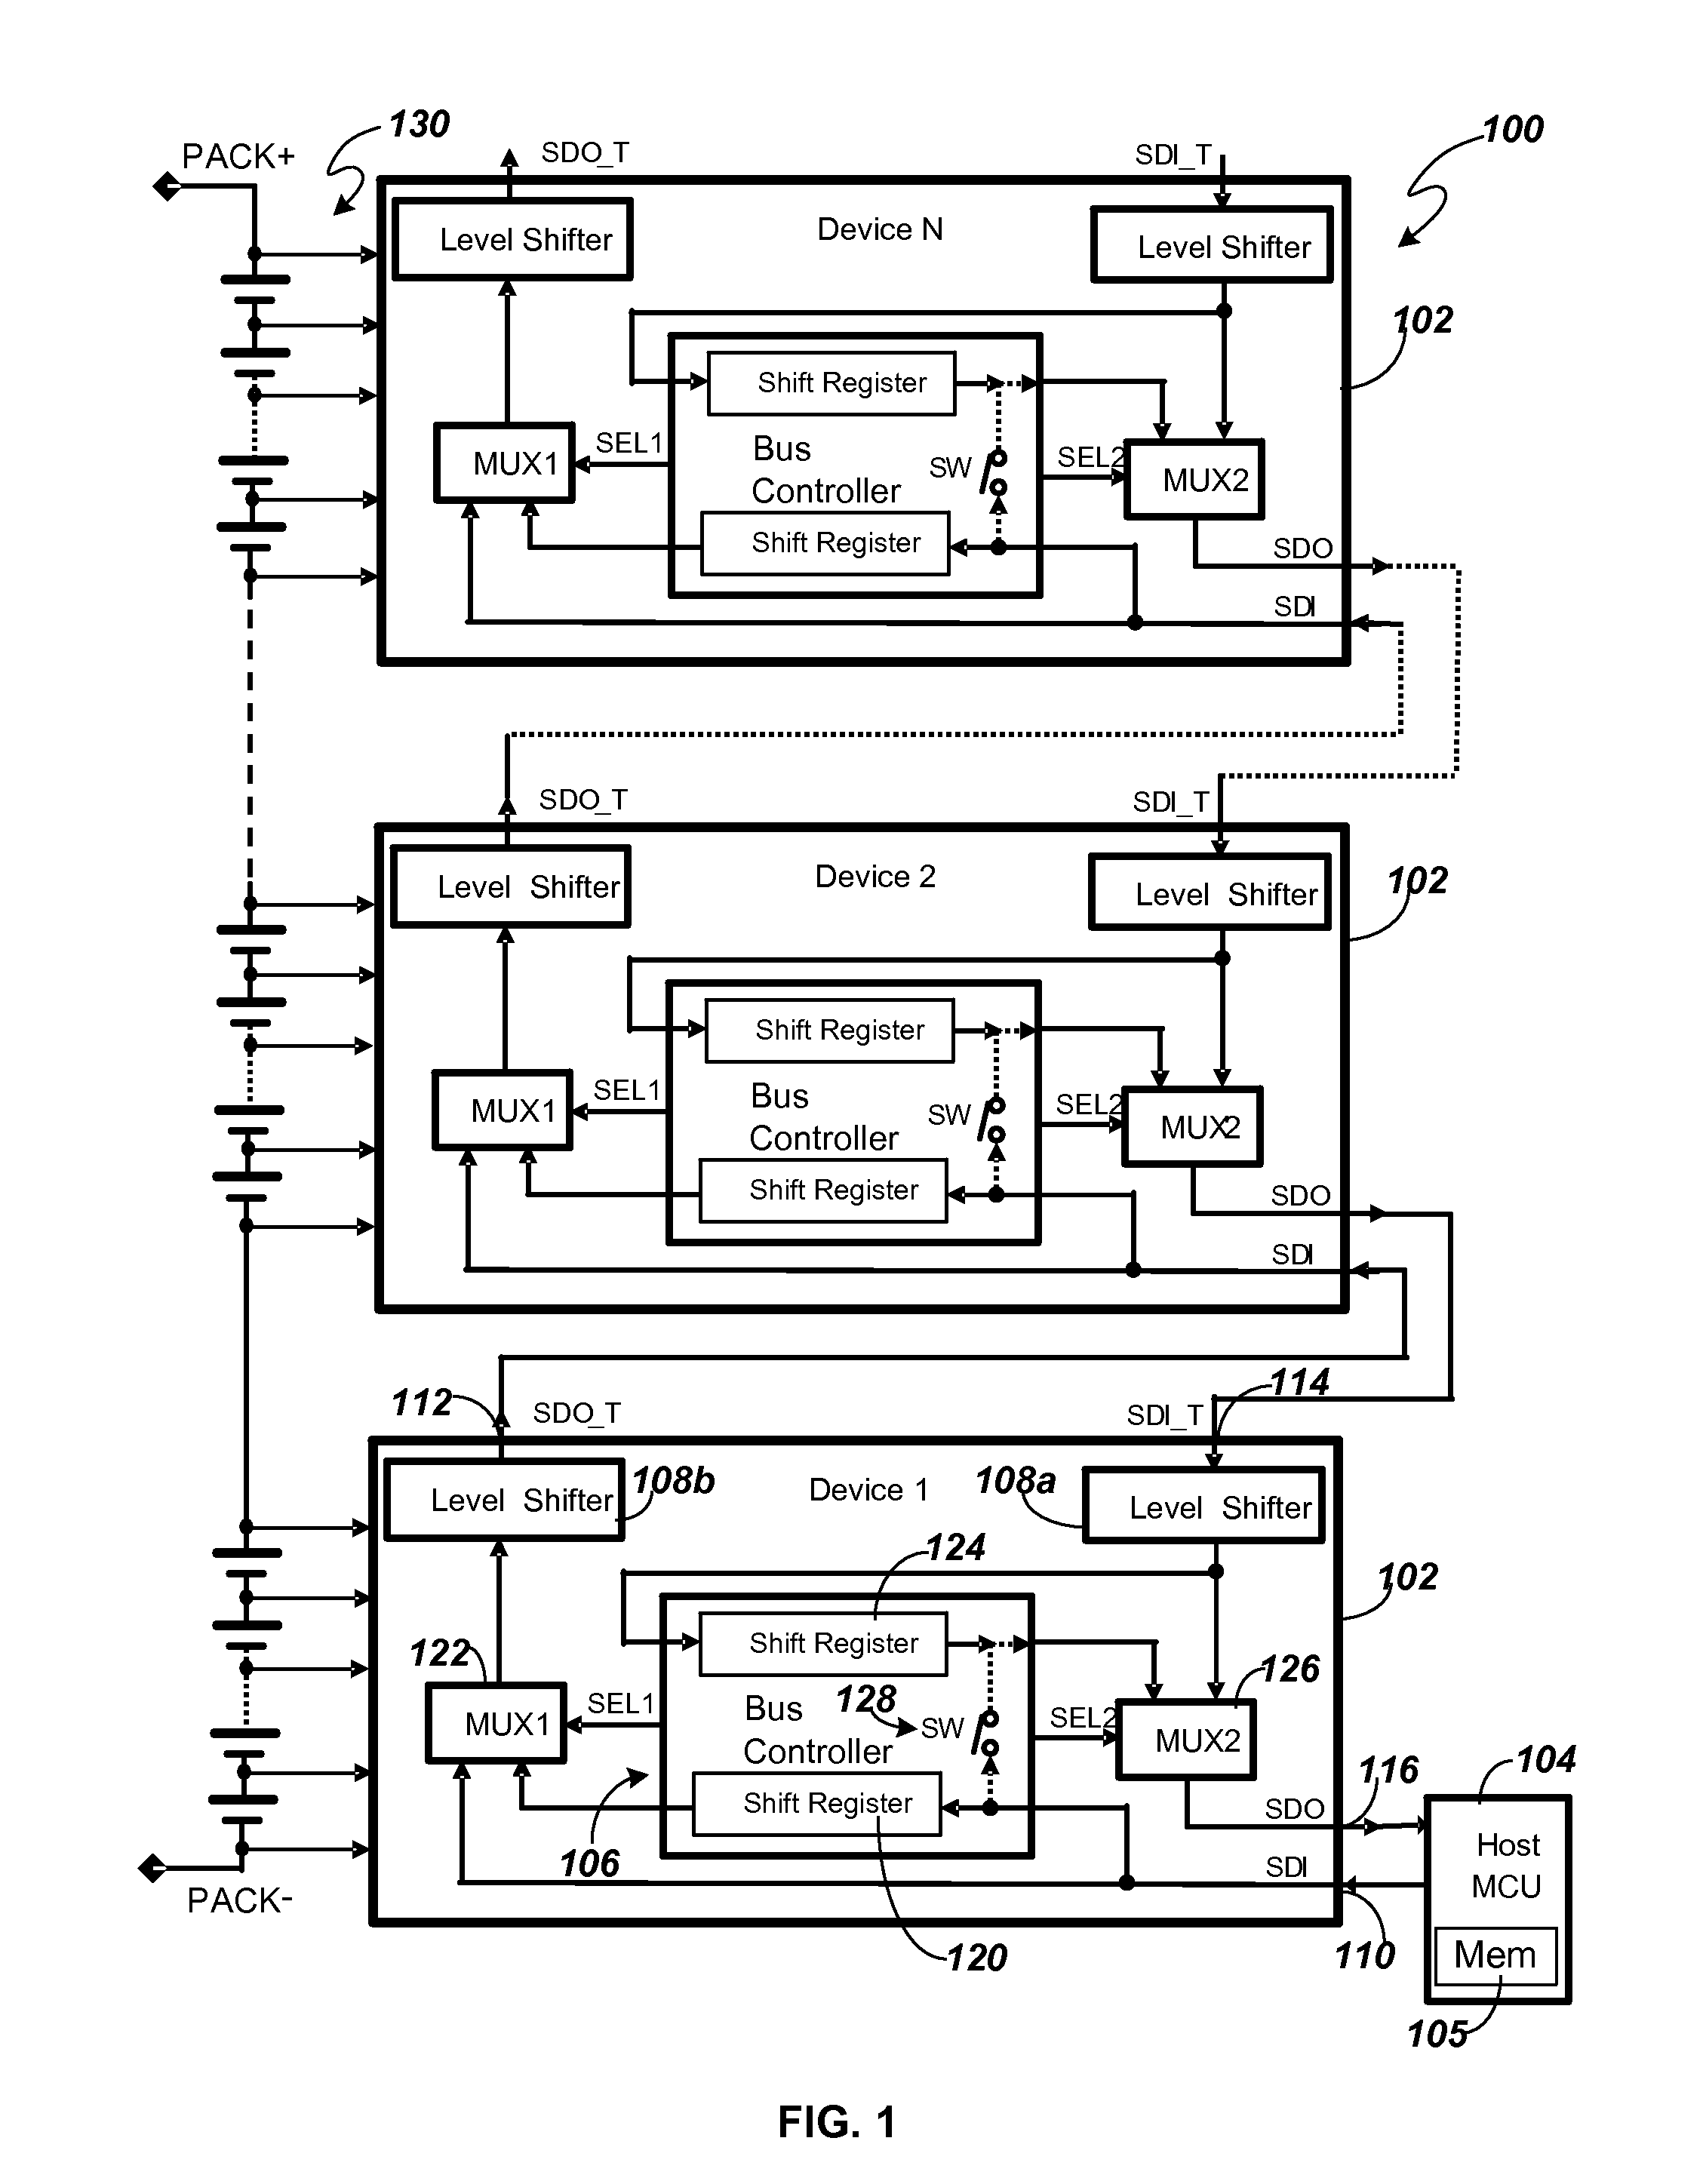 Device address assignment in a bus cascade system